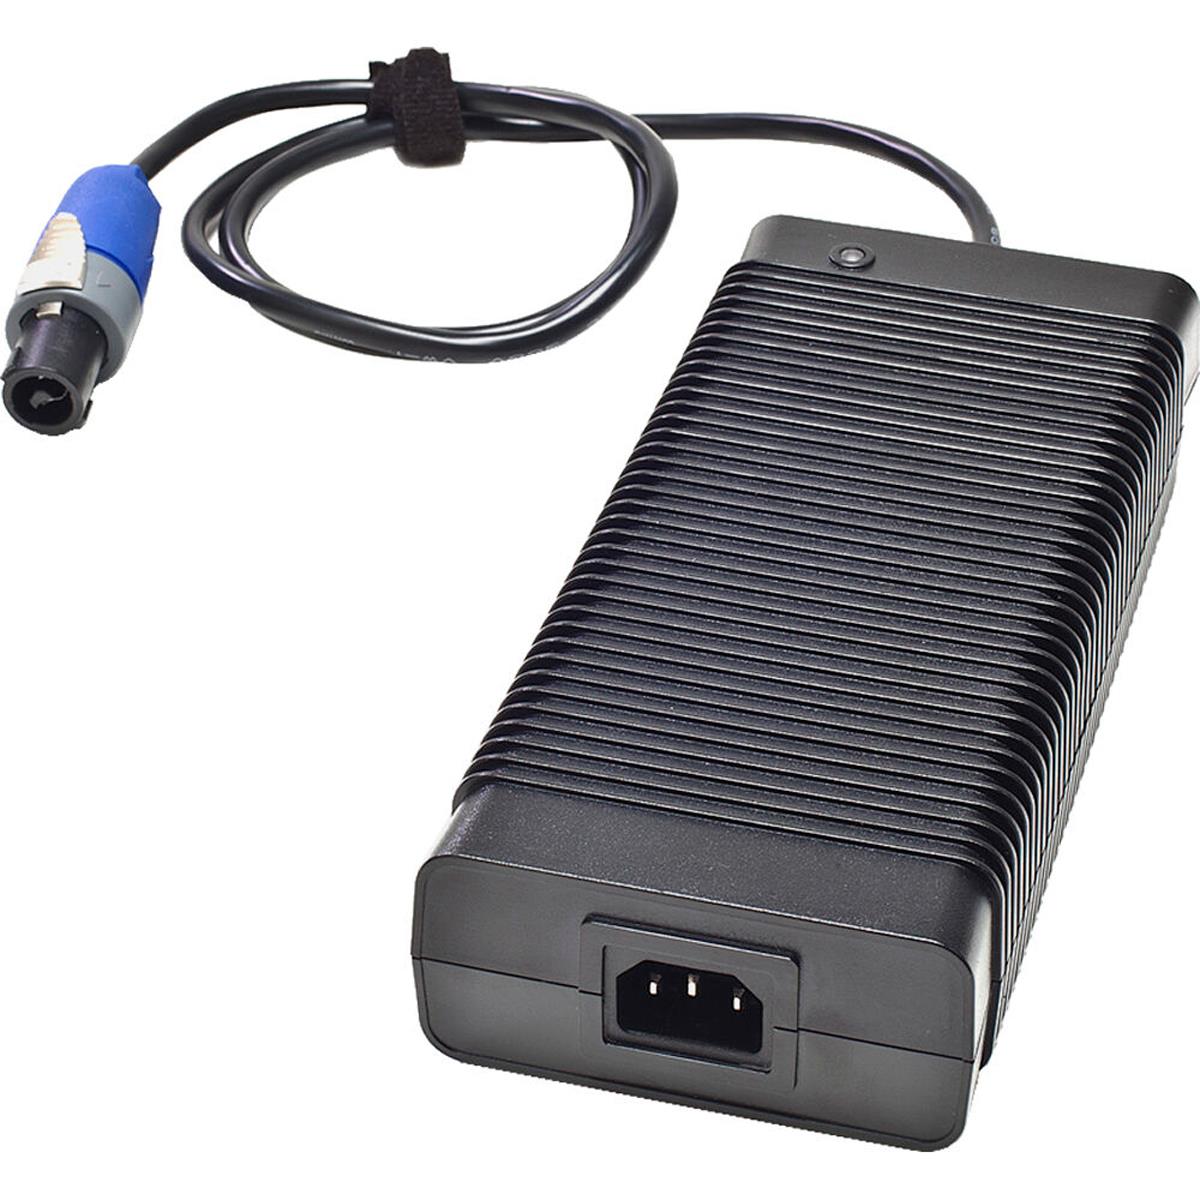 Image of Carpet Light 24V 220W AC Power Supply with speakON Connector for CL44 Lamp Head